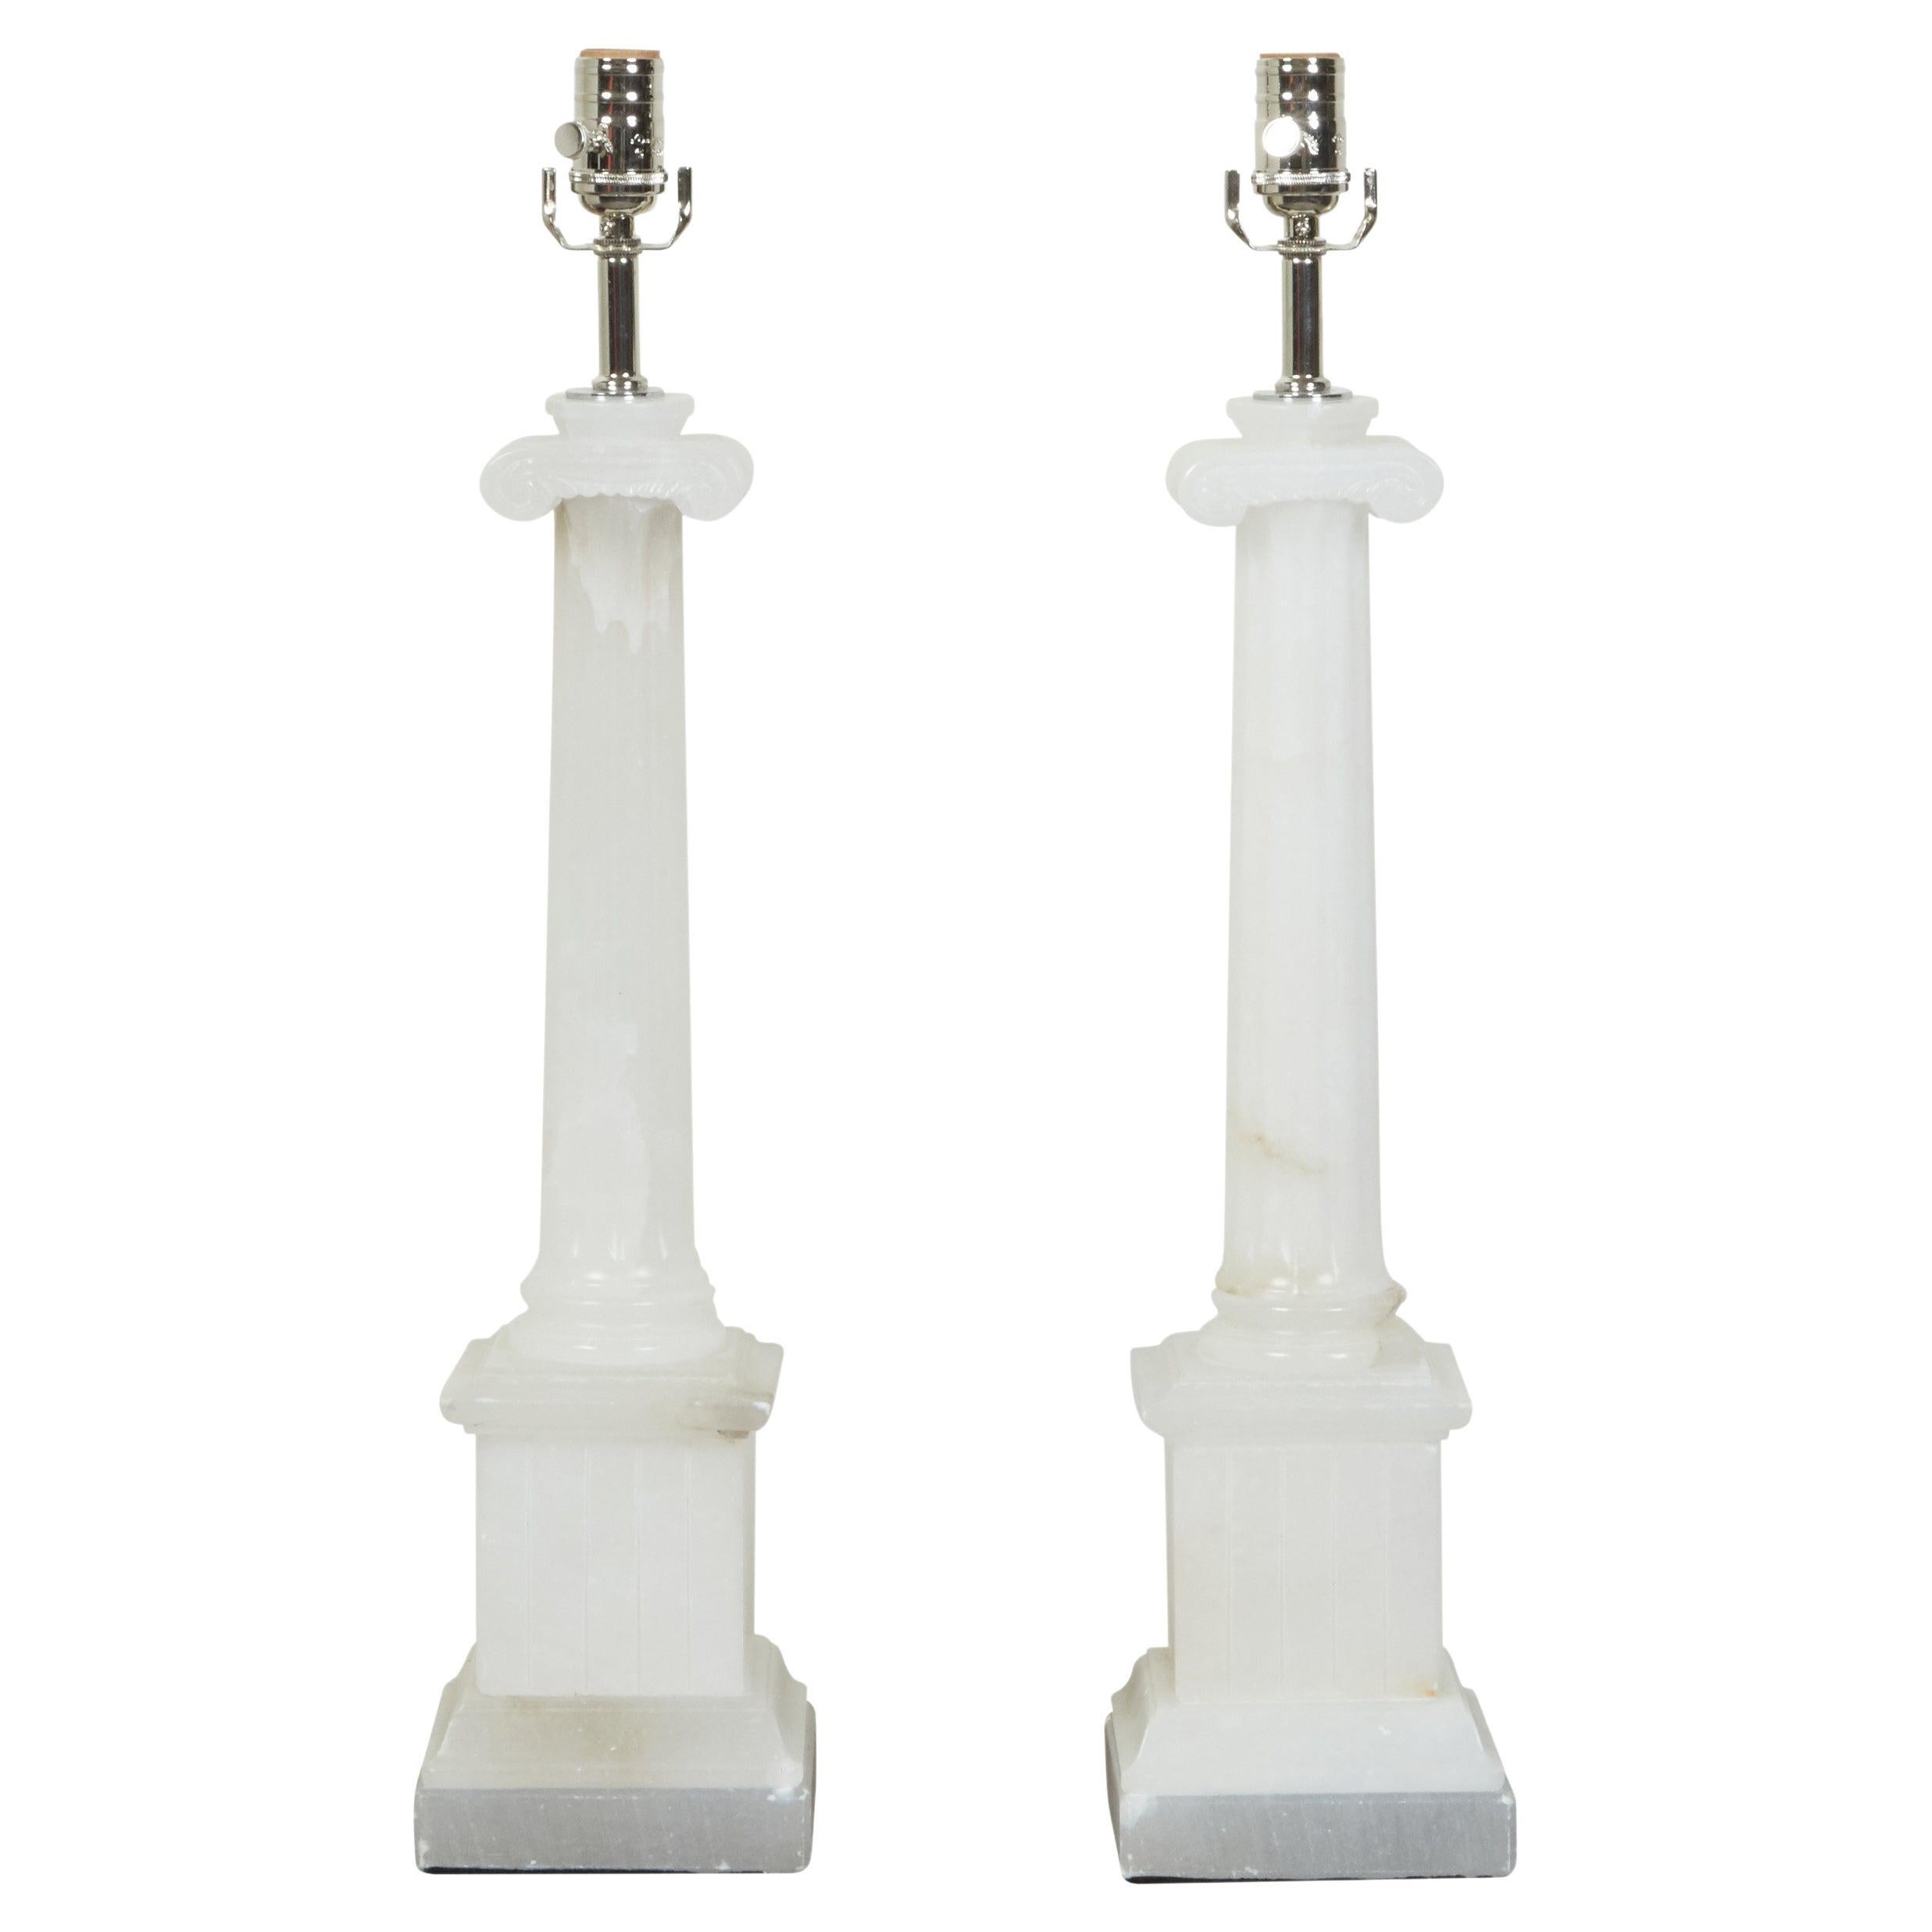 Pair of Italian Neoclassical Style Alabaster Table Lamps with Ionic Capitals